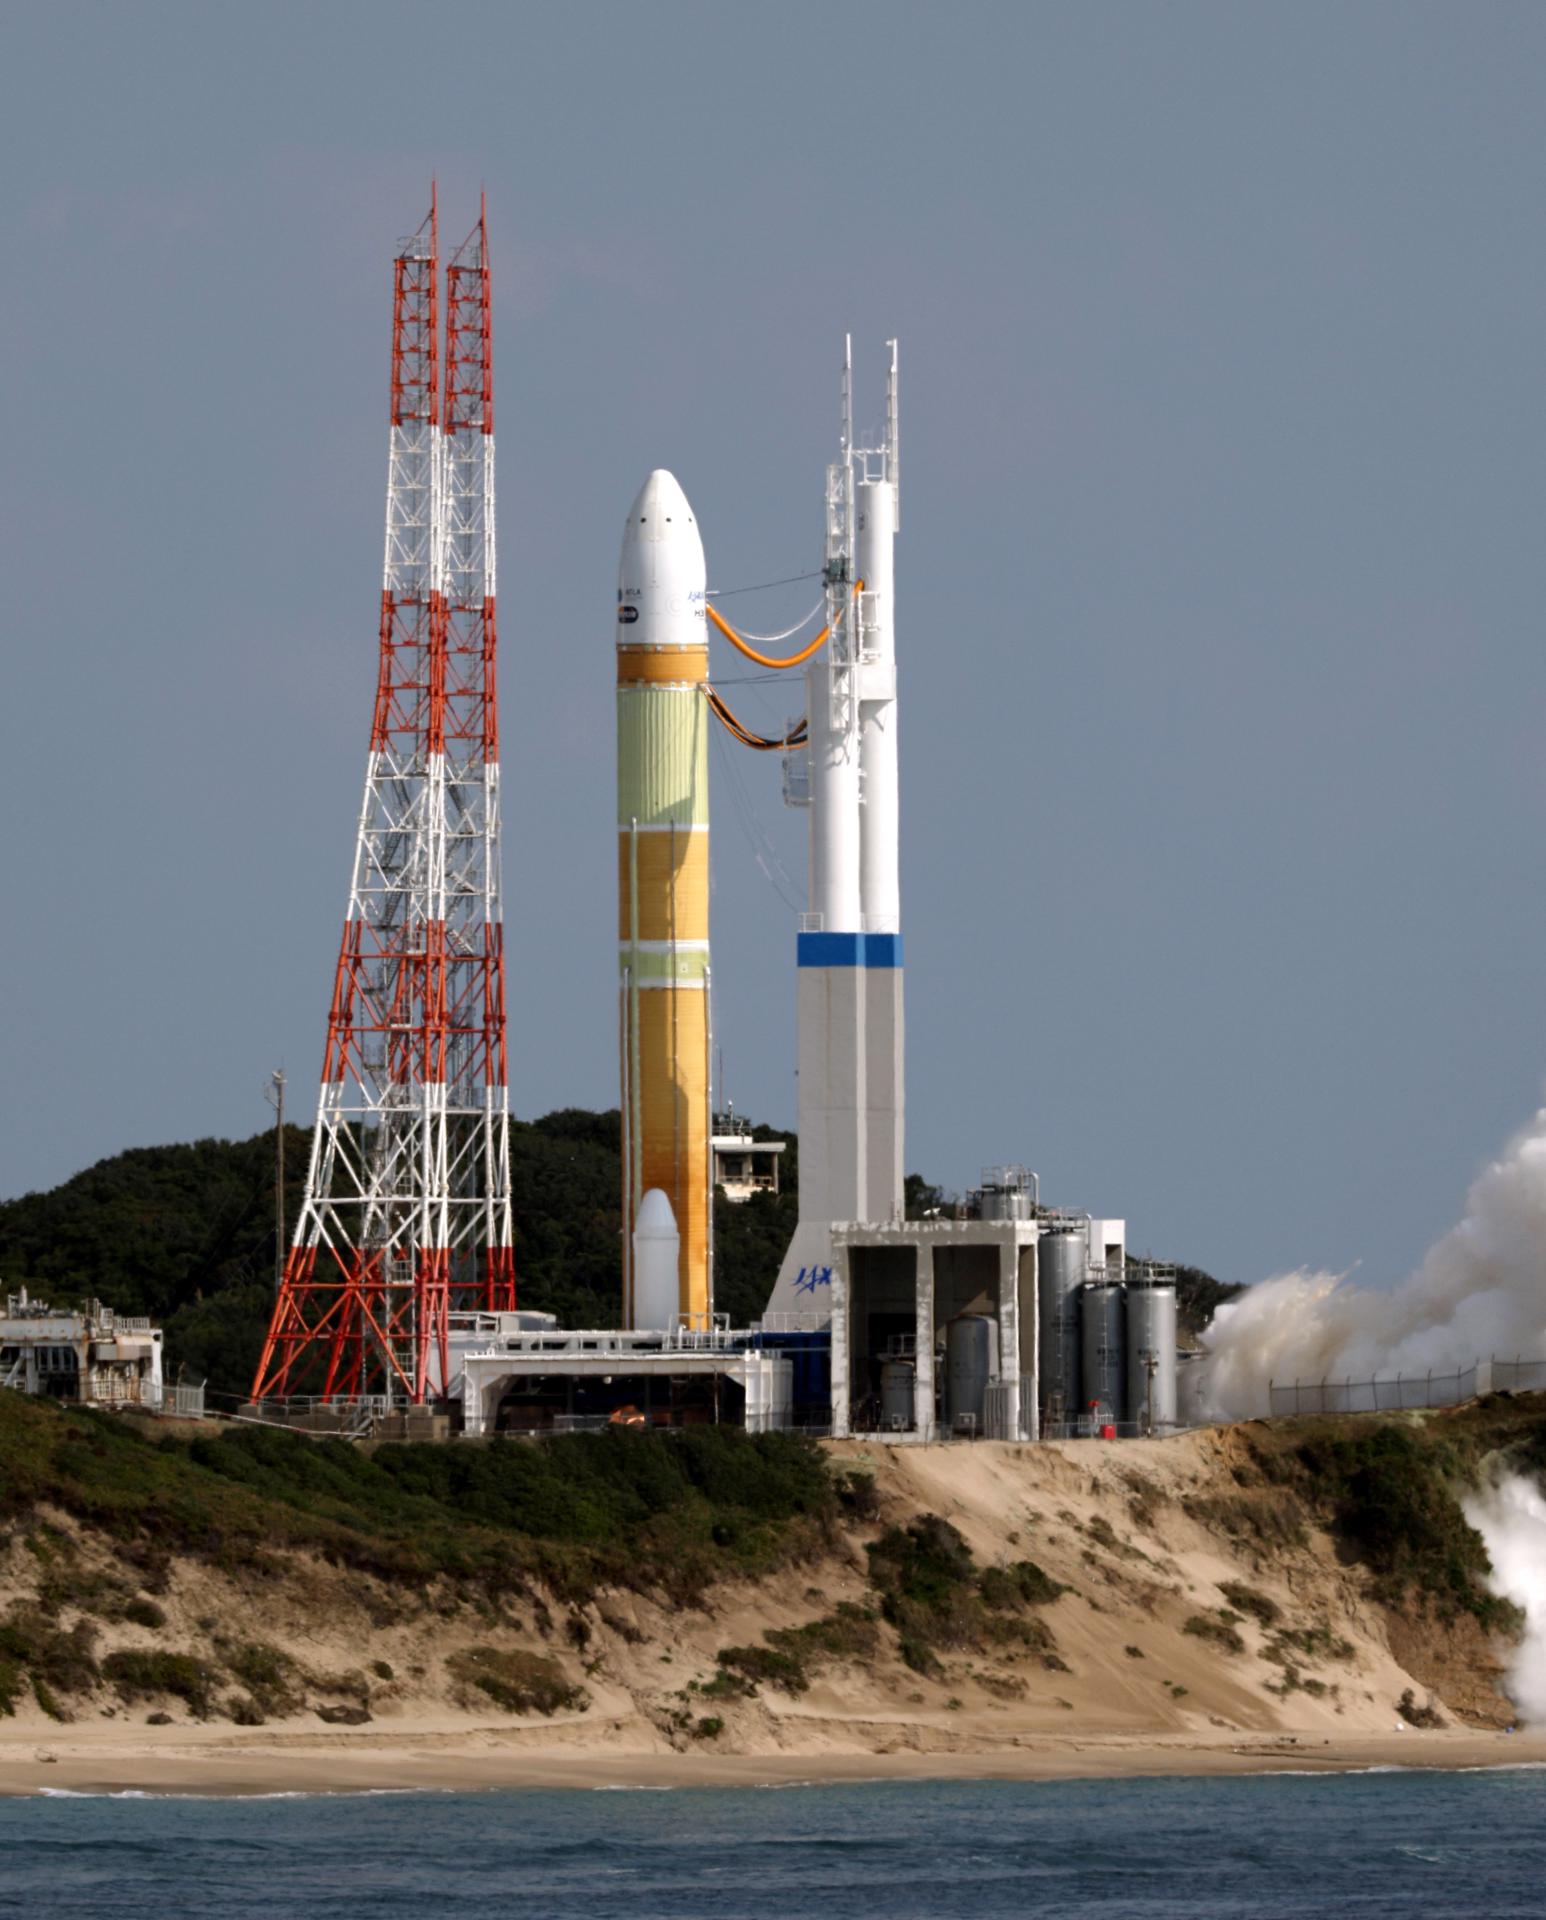 Japan's new H3 rocket is seen after the cancellation of its launch at the Tanegashima Space Center located on Tanegashima island, Kagoshima Prefecture, southwestern Japan, 17 February 2023. EFE-EPA/JIJI PRESS JAPAN OUT EDITORIAL USE ONLY/